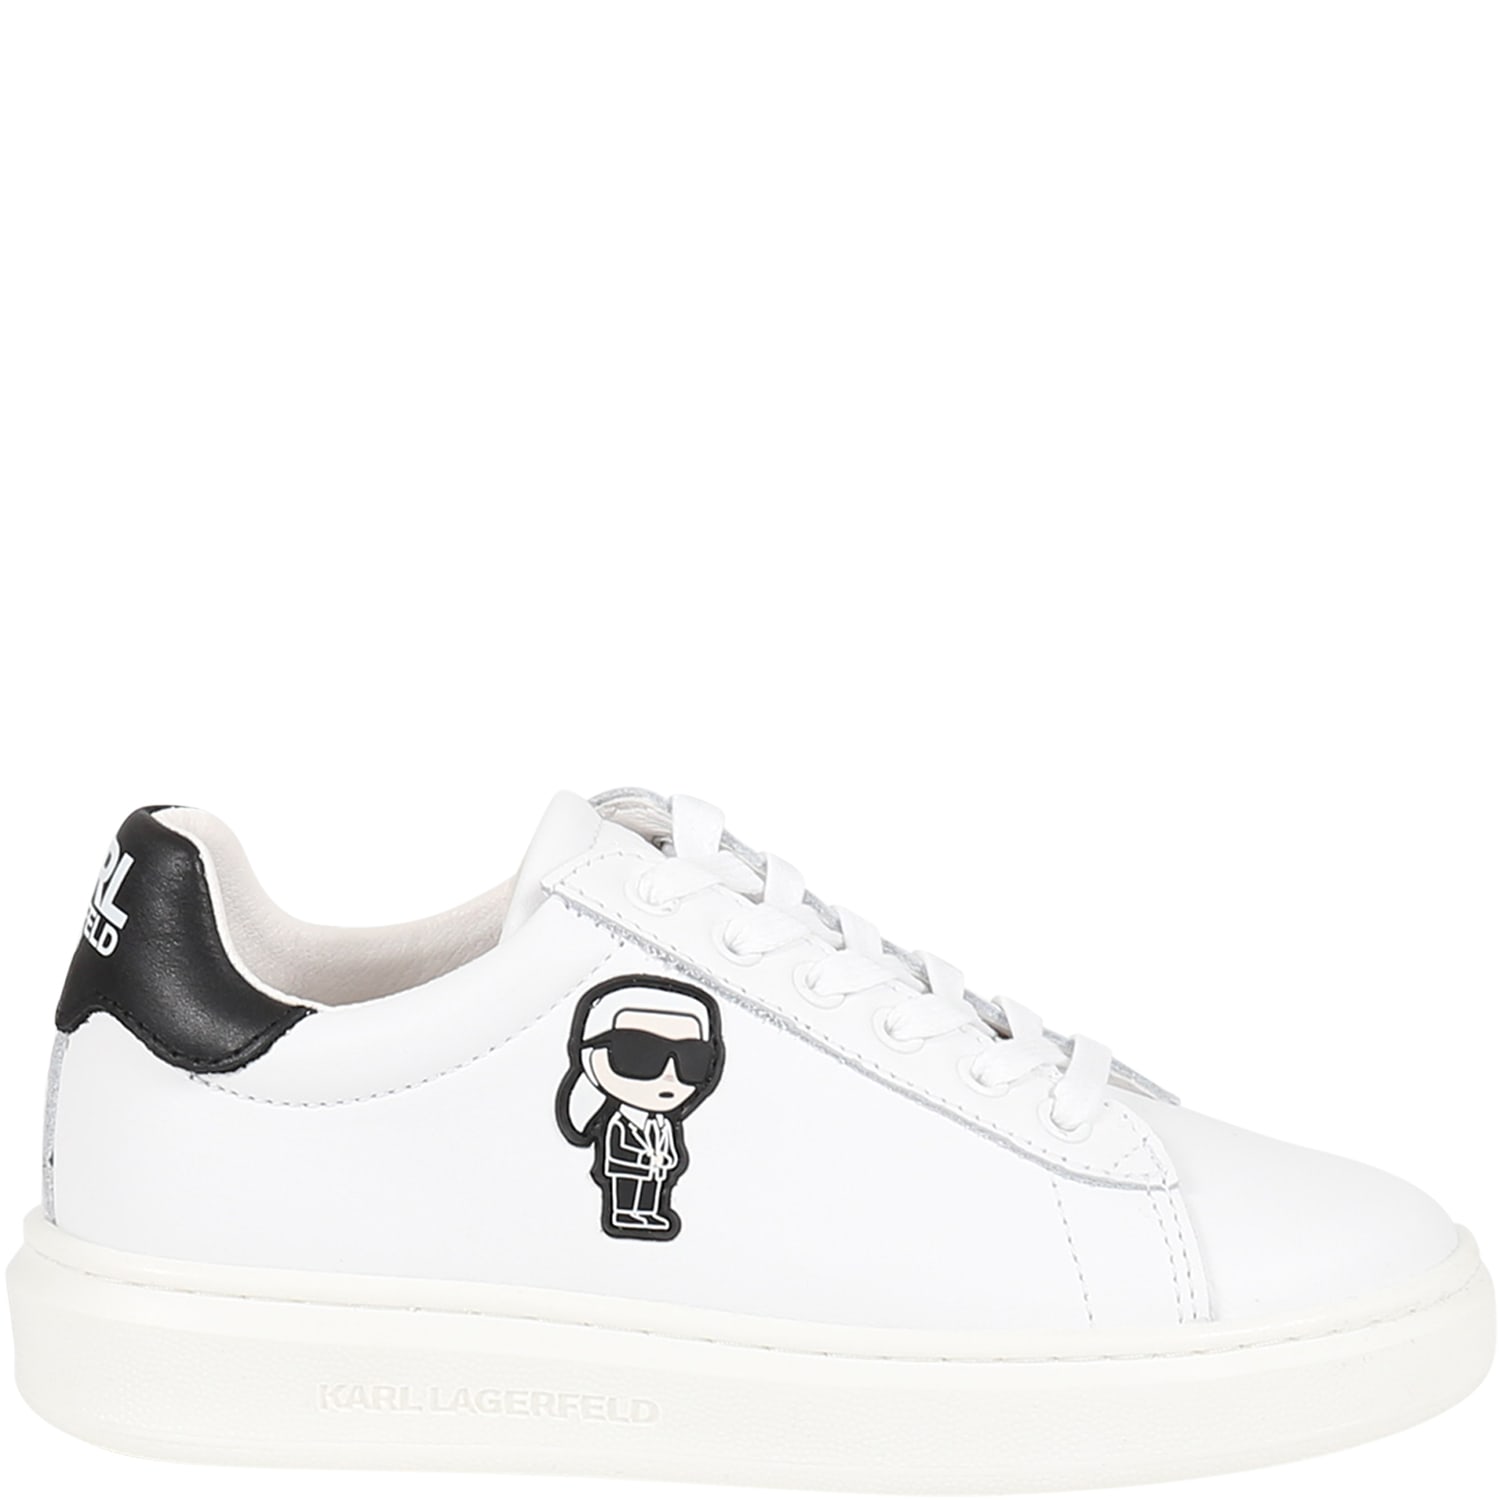 KARL LAGERFELD WHITE SNEAKERS FOR KIDS WITH KARL LAGERFELD PATCH AND LOGO